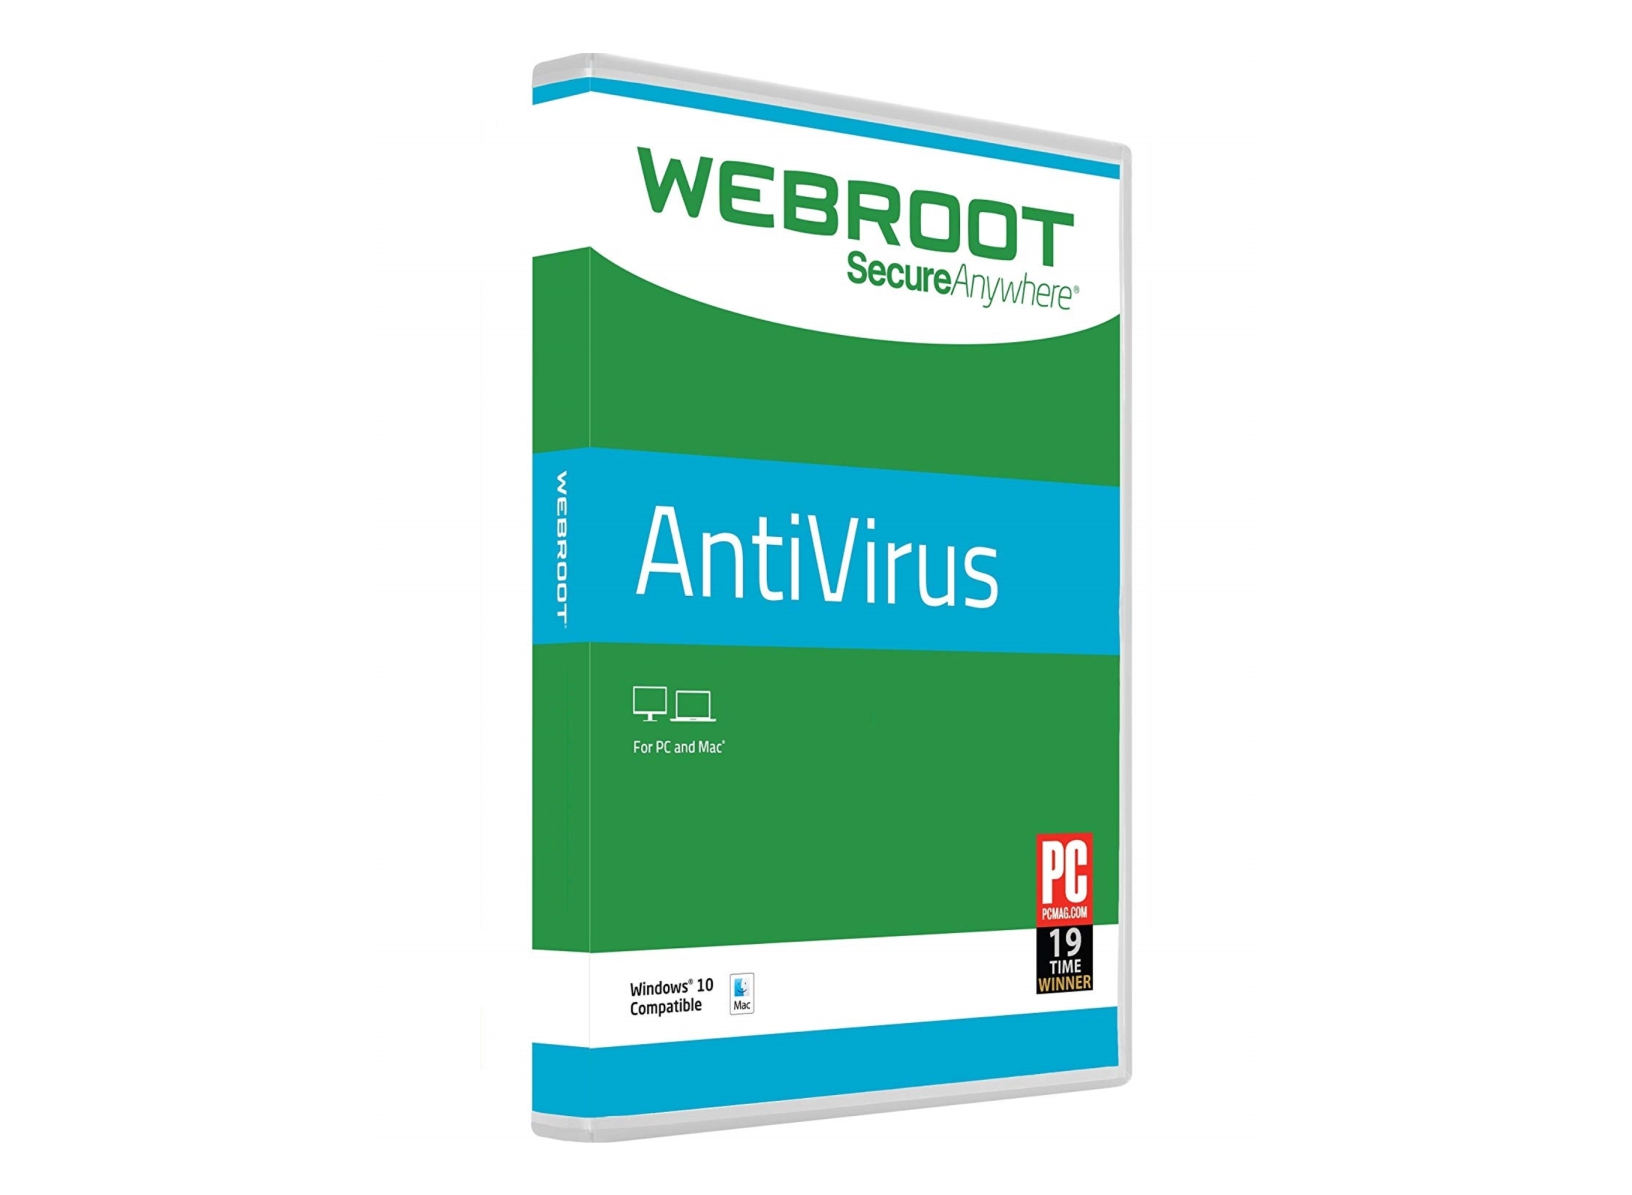 WebRoot Secure Anywhere